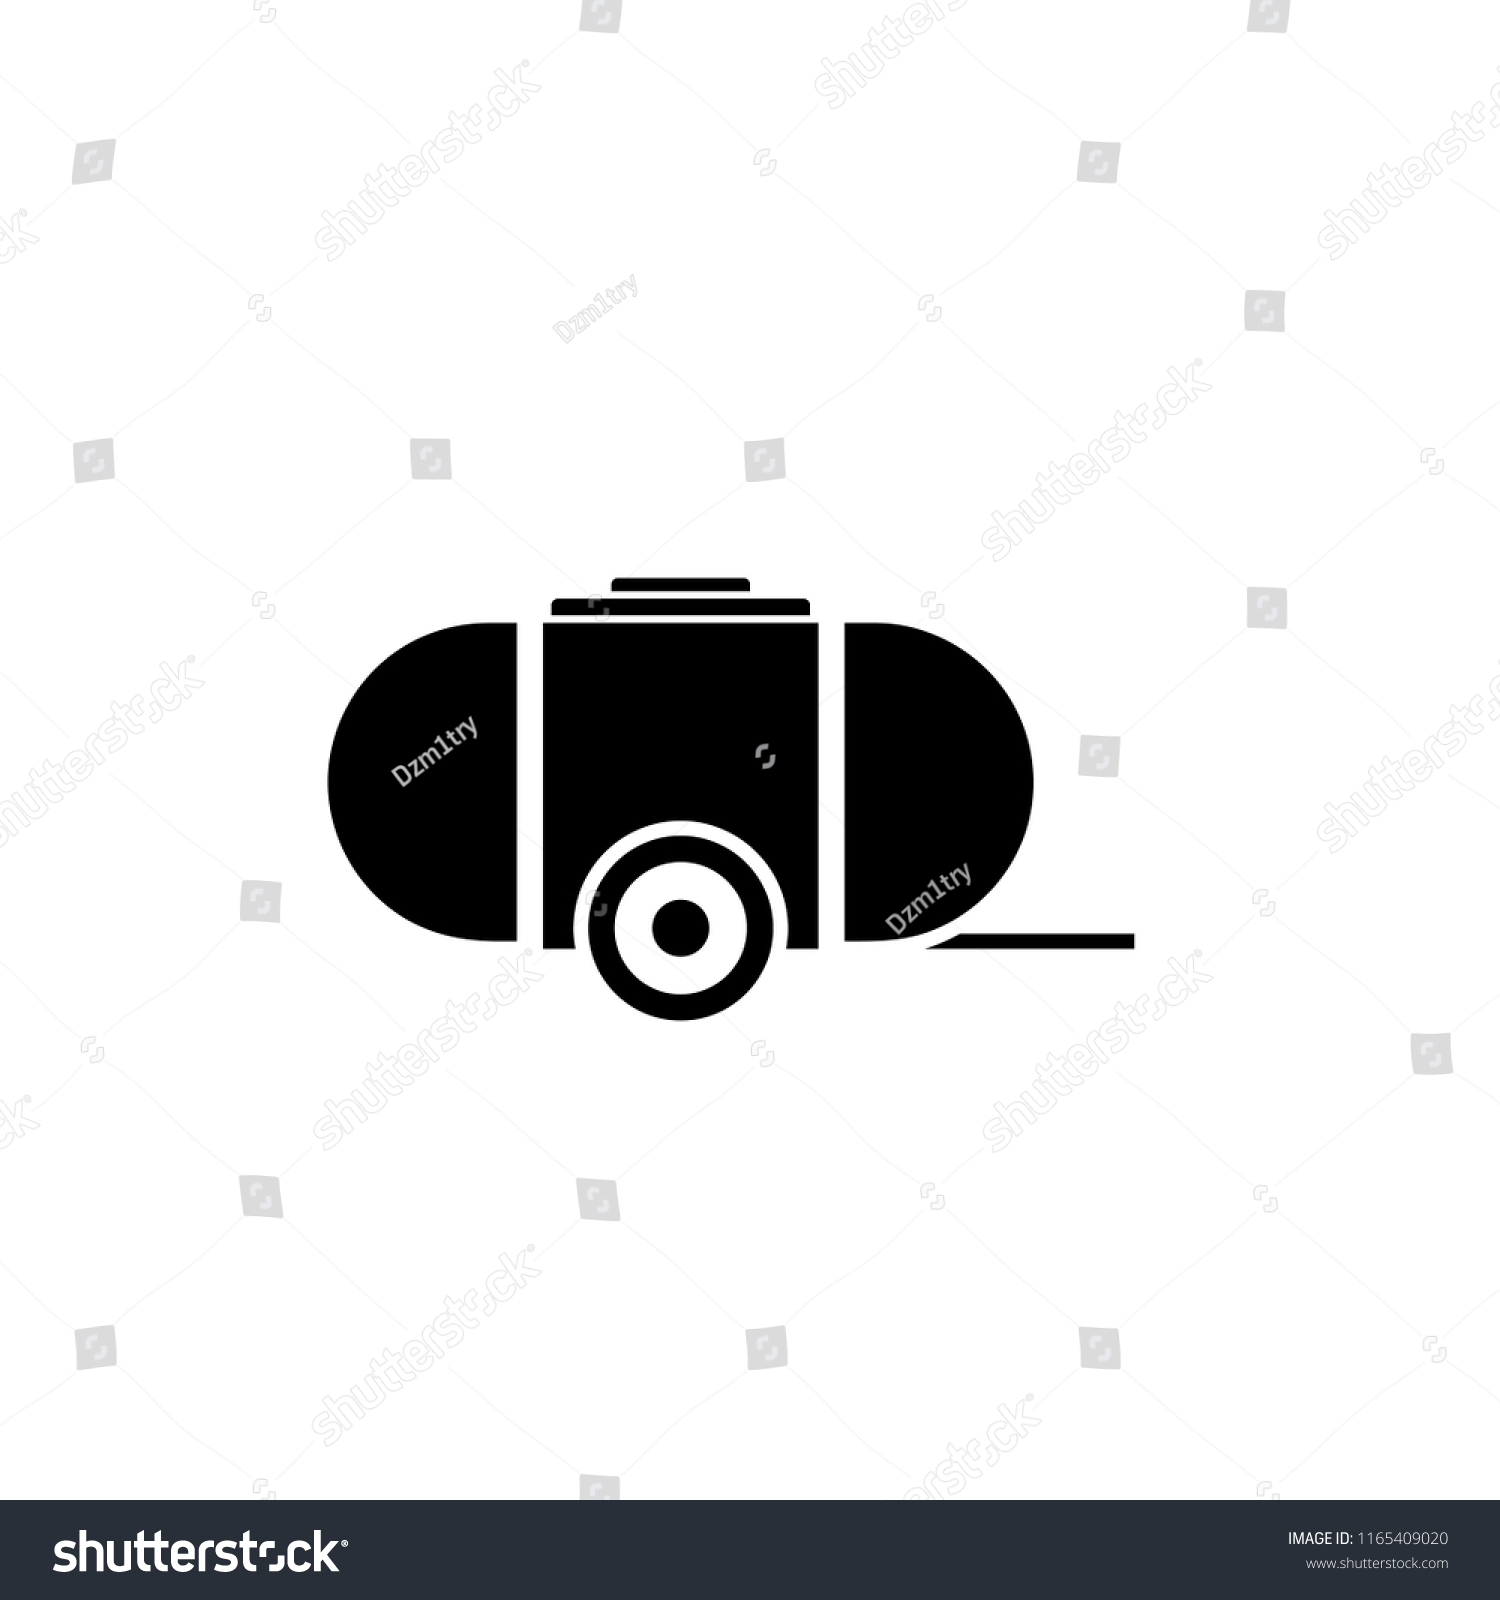 SVG of Mobile water tank silhouette icon. Clipart image isolated on white background svg